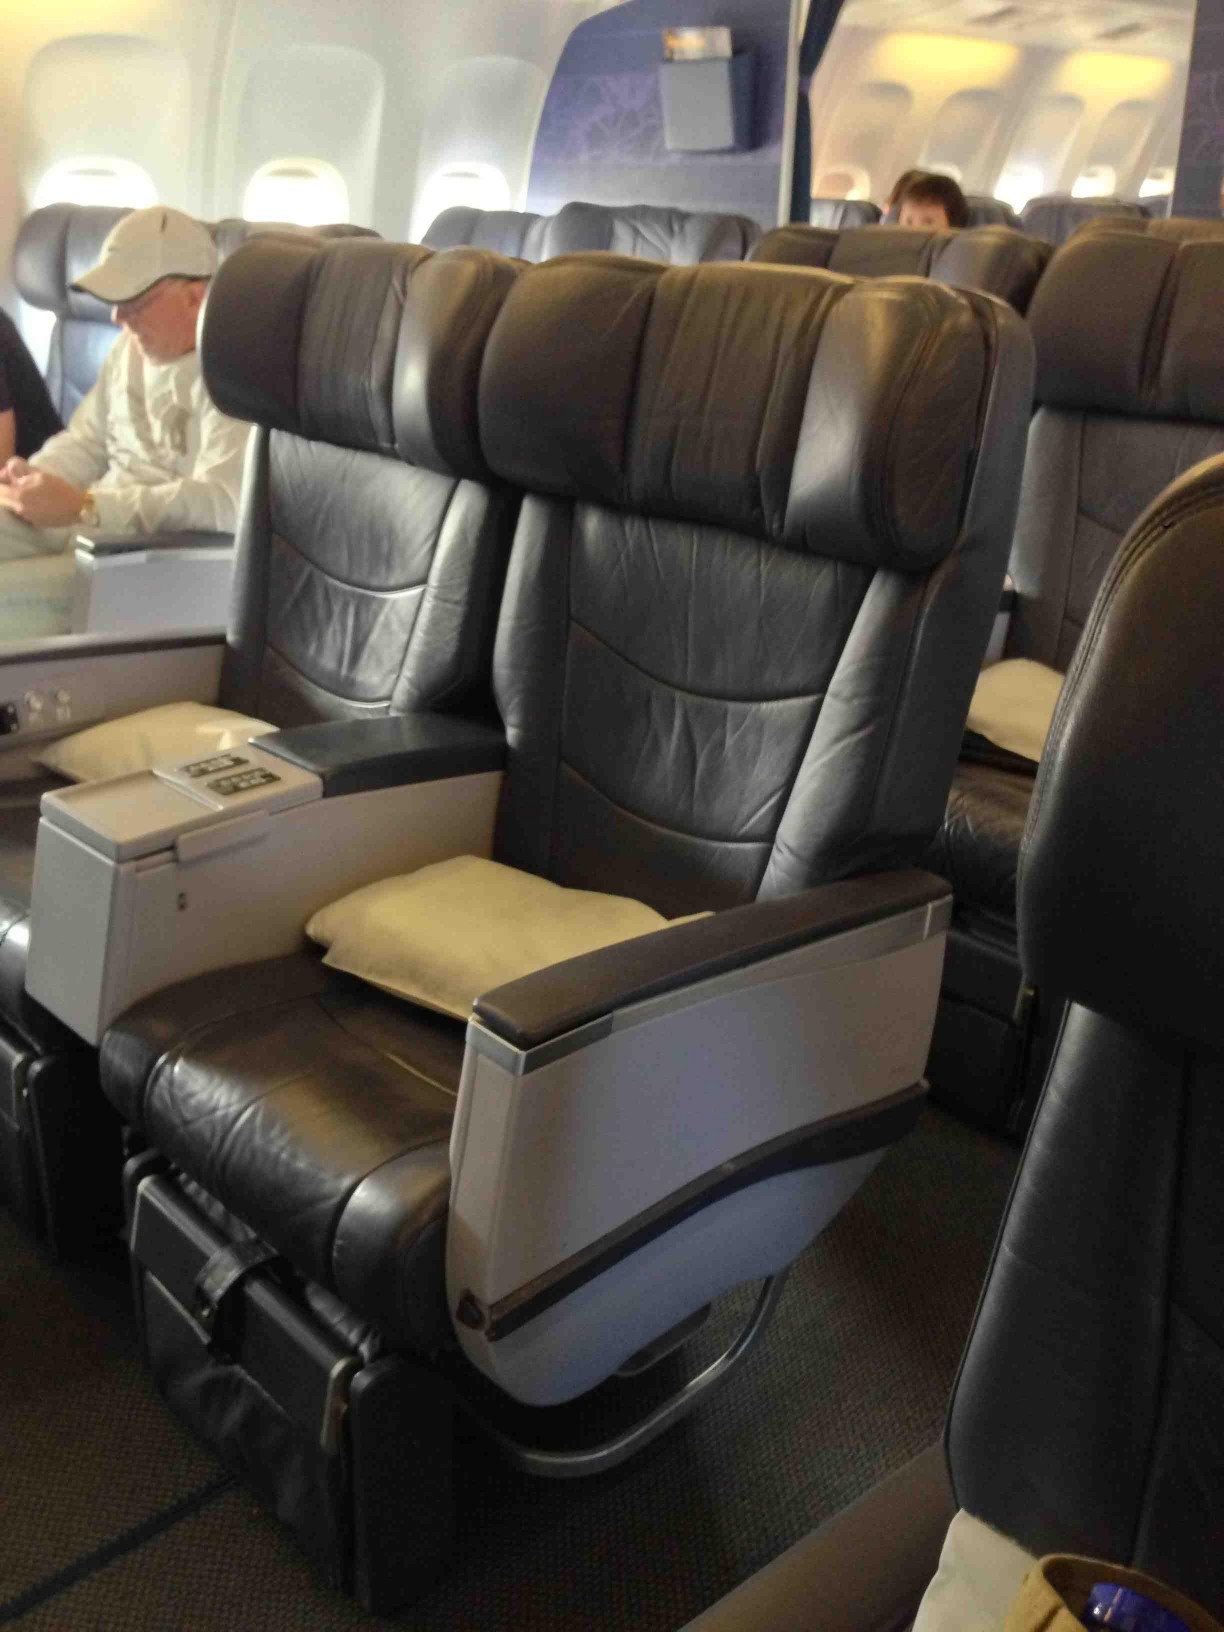 Hawaiian Airlines Boeing 767 300ER First Class Cabin Configuration and Seats layout photos